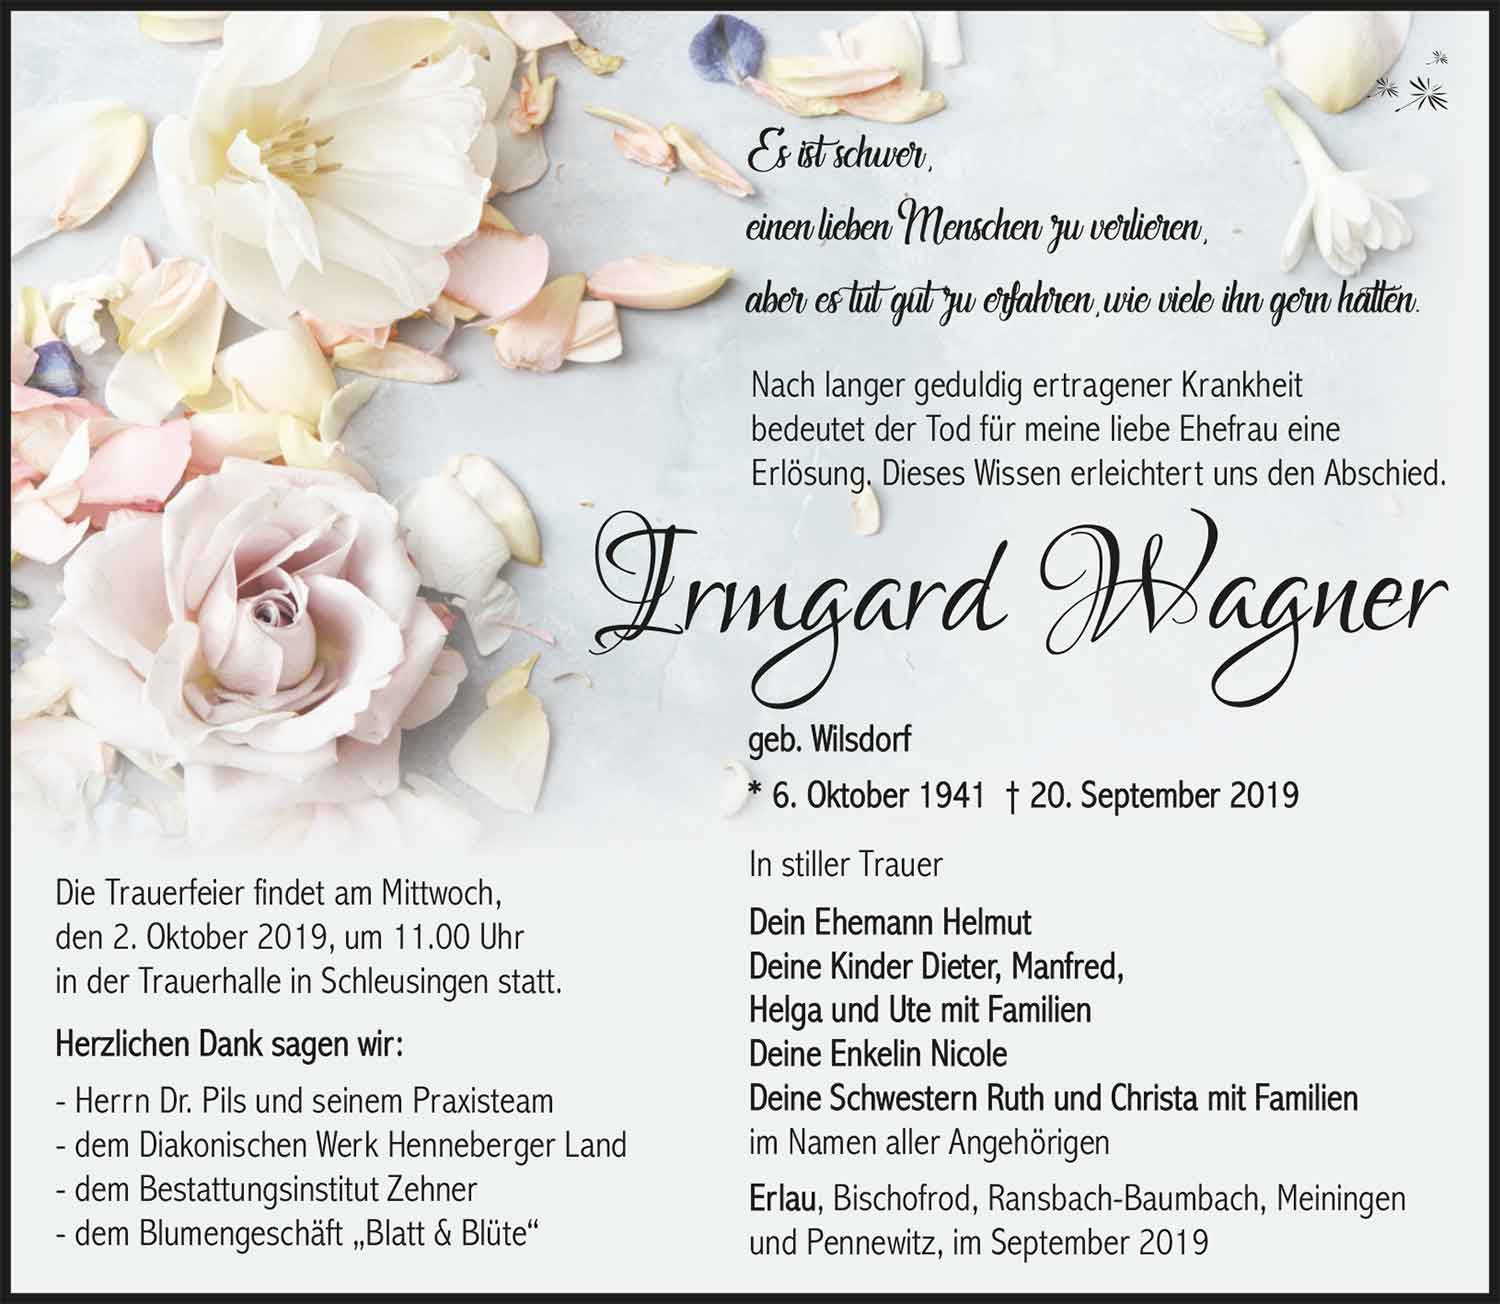 Trauer_Irmgard_Wagner